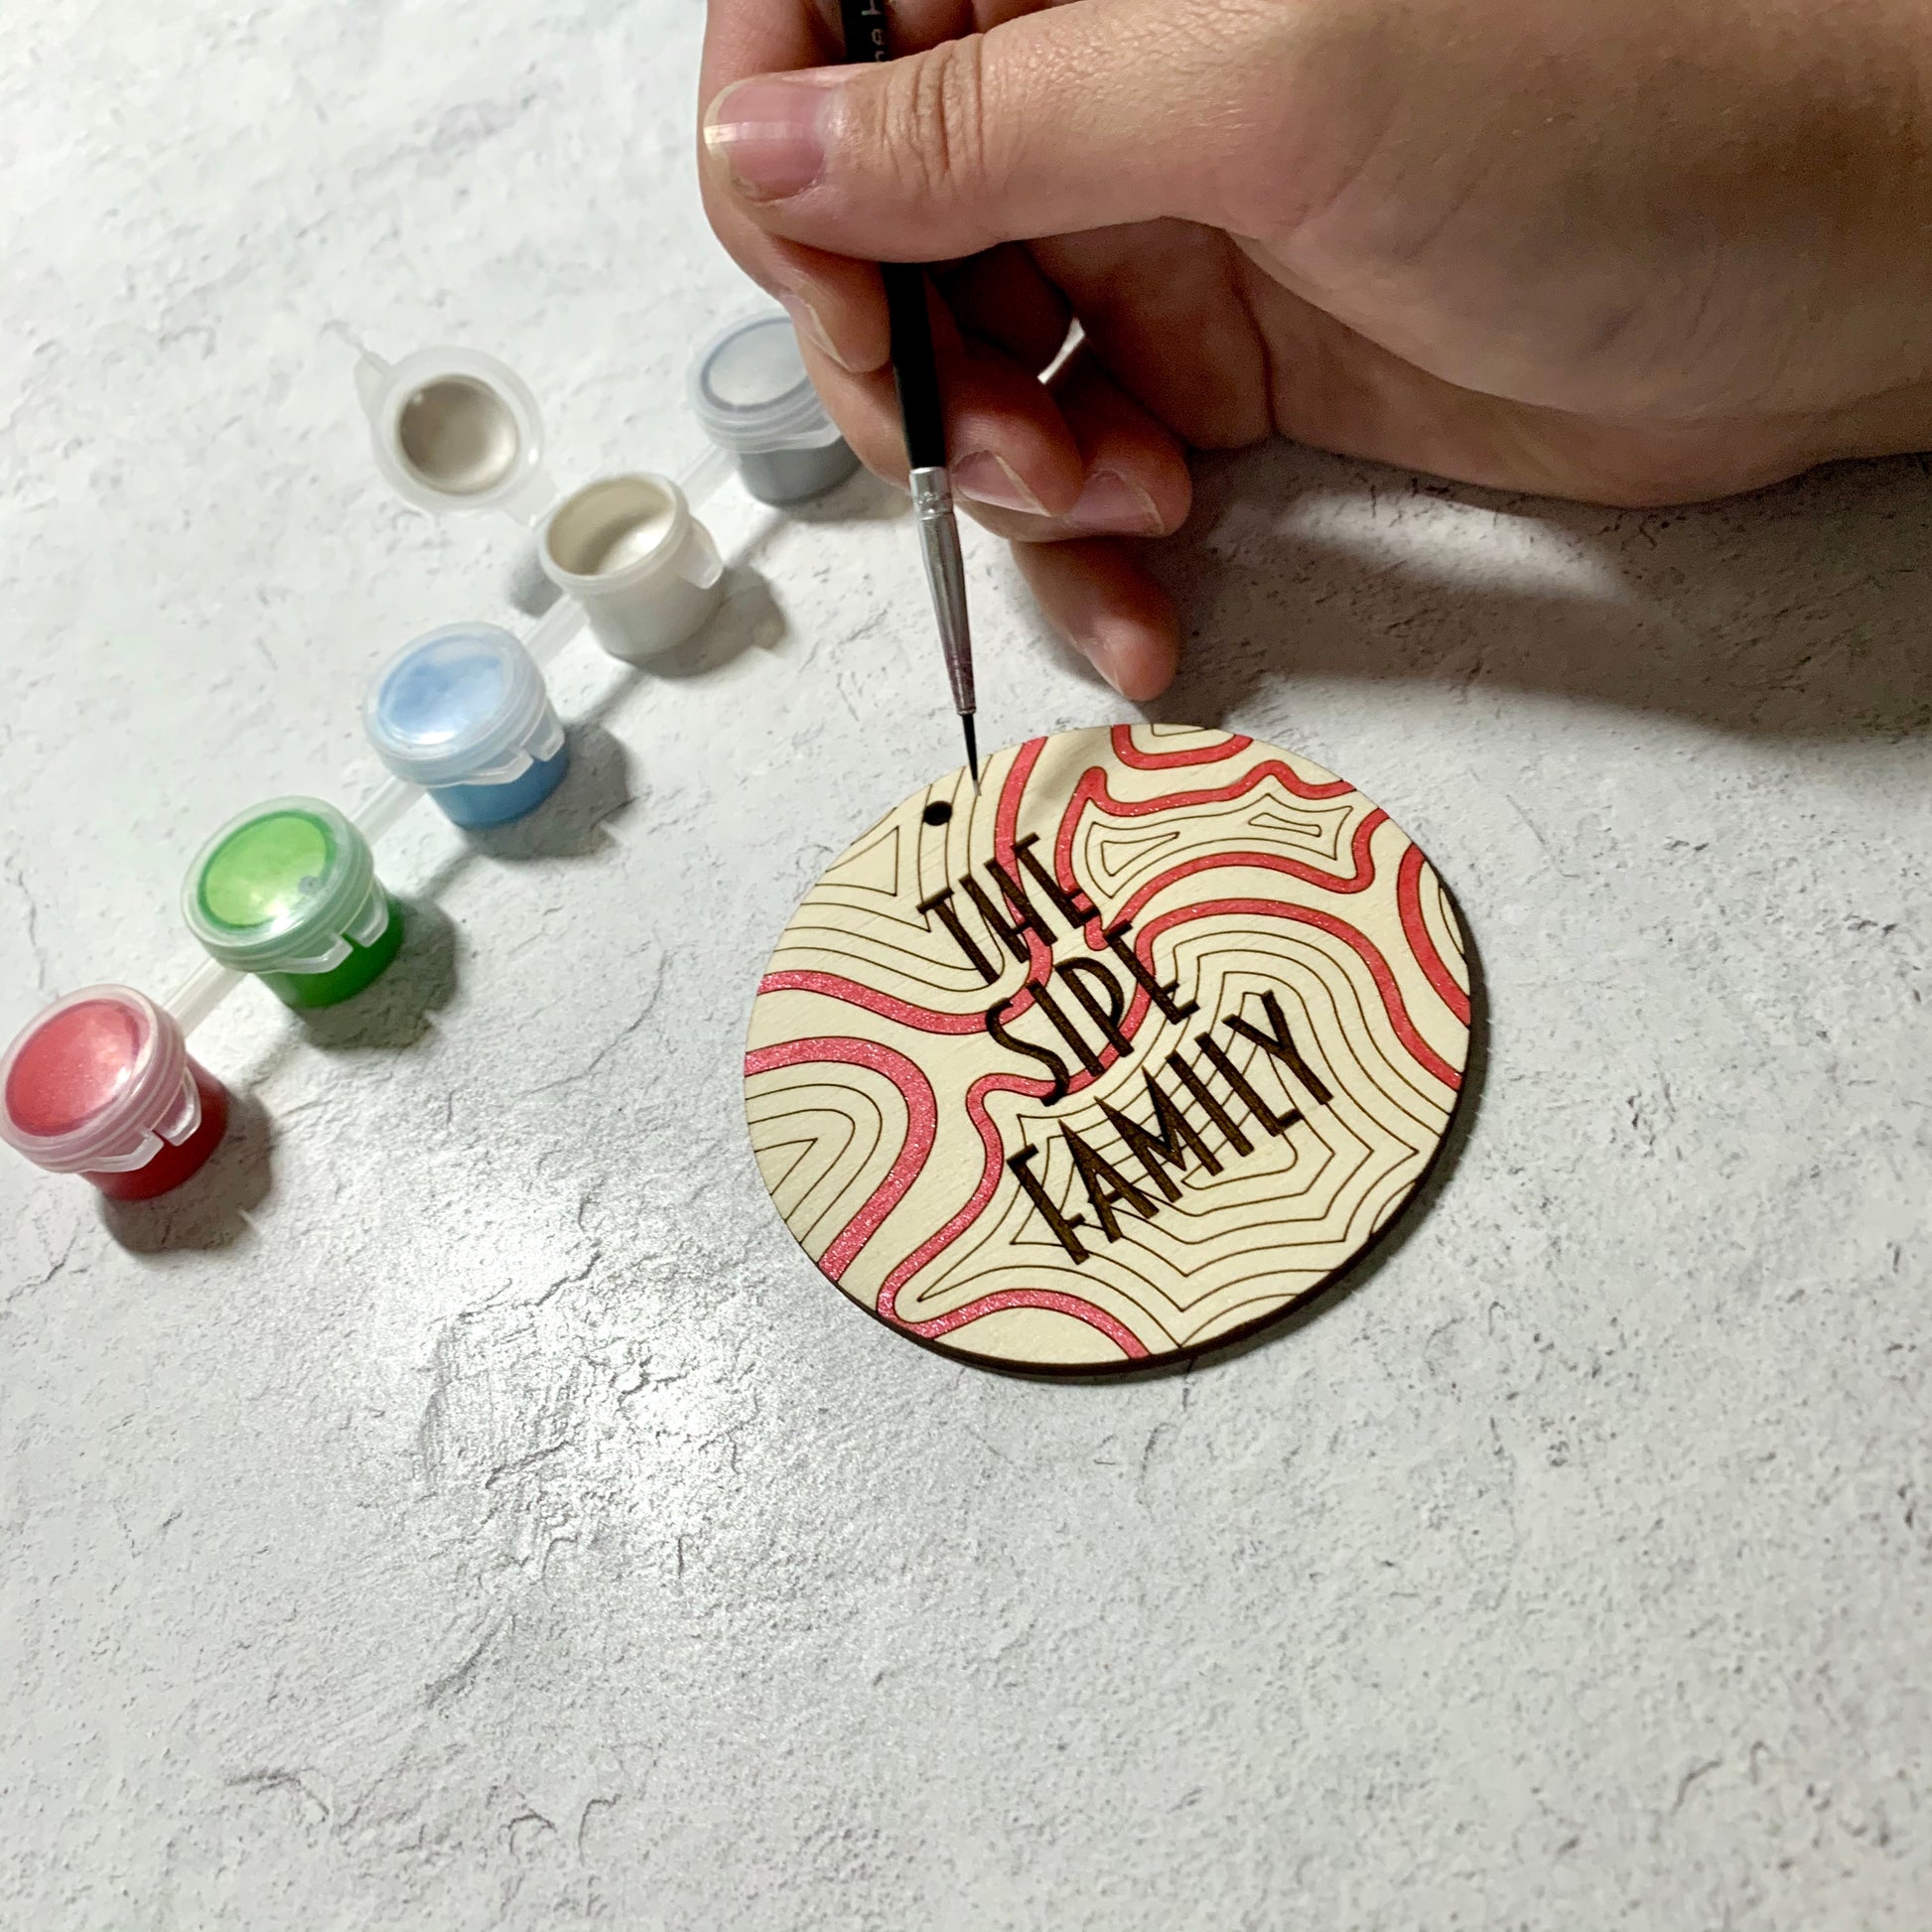 Wooden Ornament Paint Kits: Patterns Engraved and Laser Cut in Birch Plywood with 6 metallic paints included by LeeMo Designs in Bend, Oregon